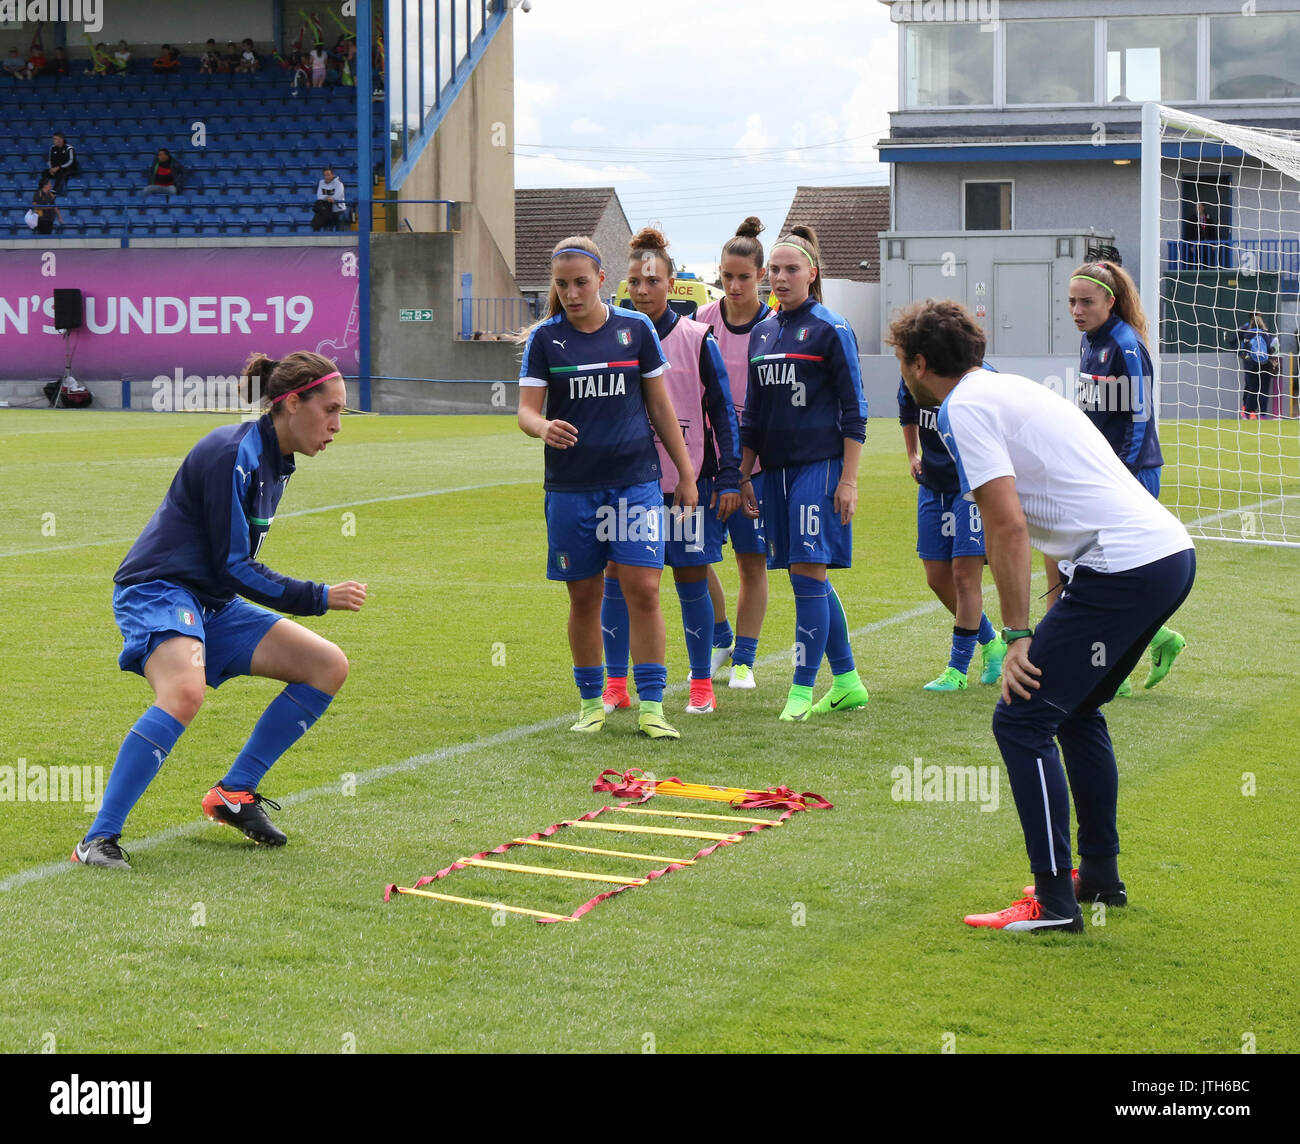 Mourneview Park, Lurgan, Northern Ireland. 08 August 2017. UEFA Women's Under-19 Championship Group B – Italy v England. Italy warm-up at Mourneview Park. Credit: David Hunter/Alamy Live News. Stock Photo